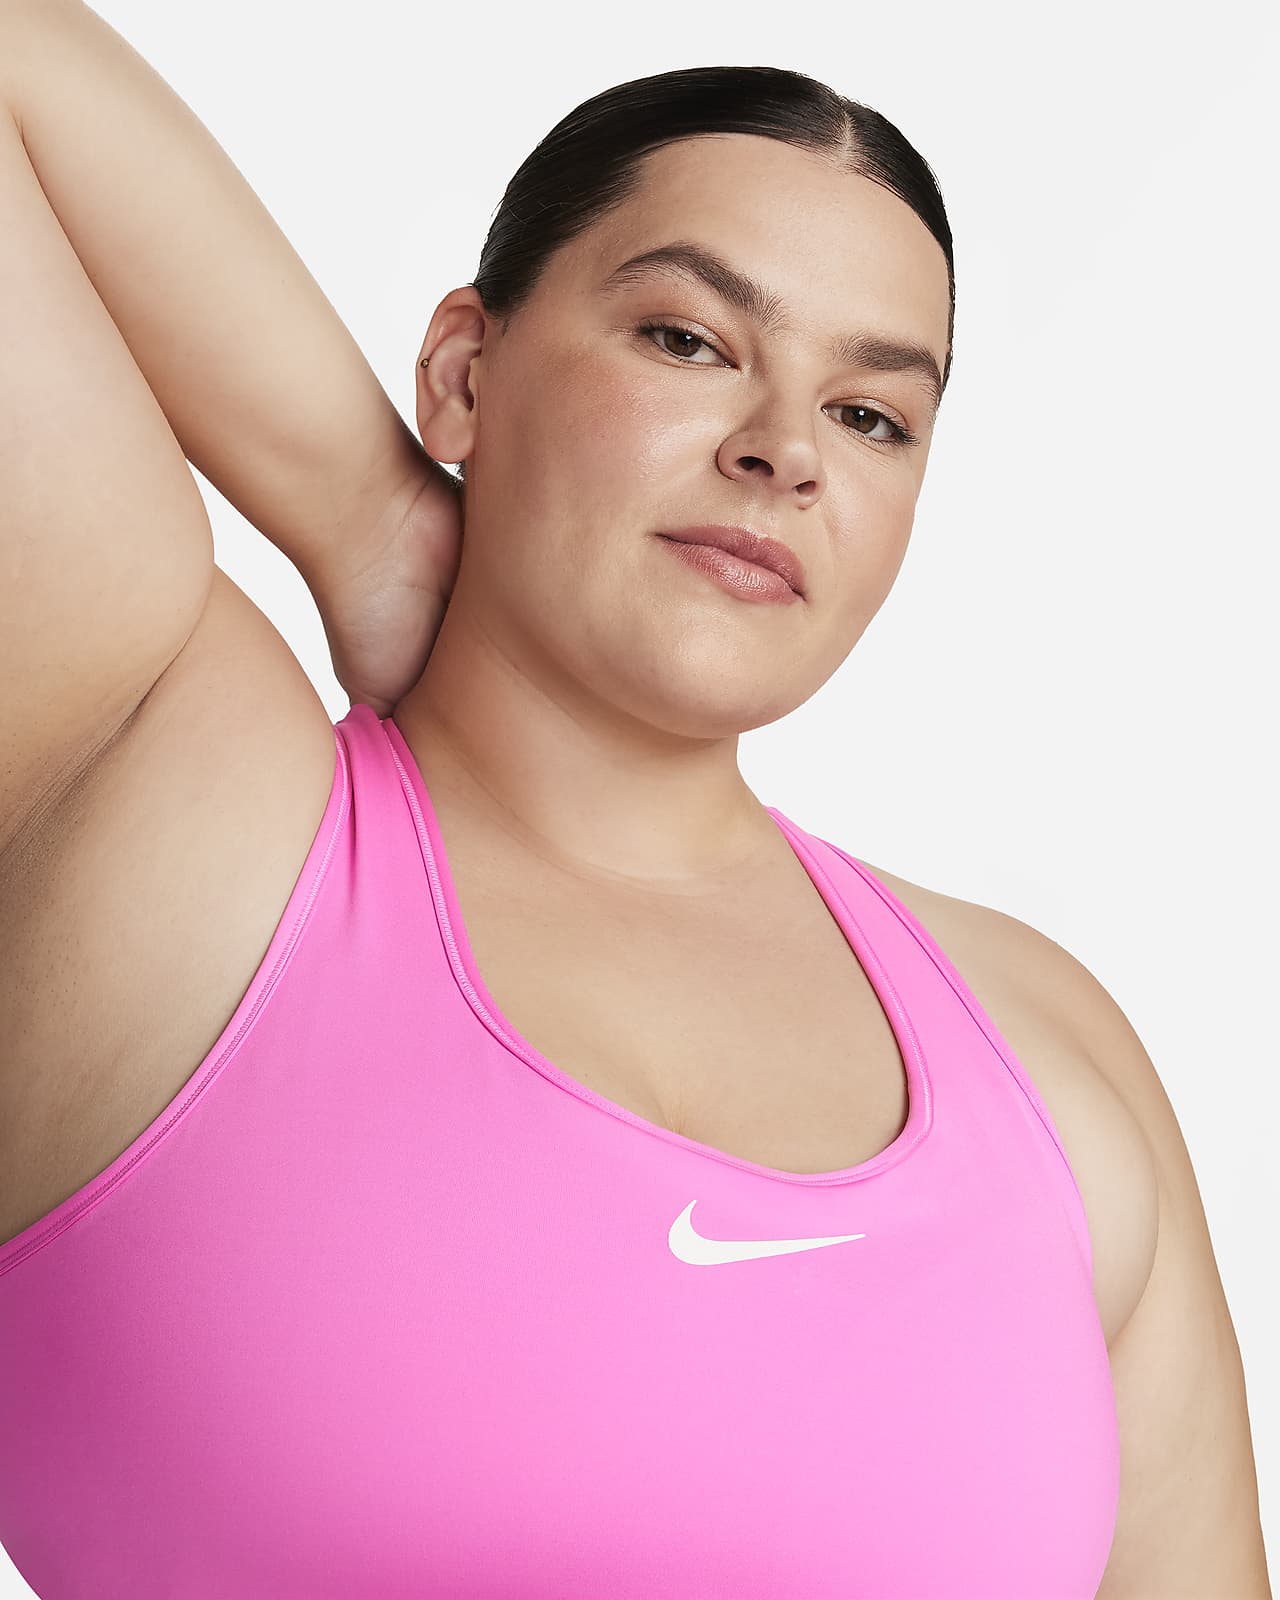 Nike Performance High support sports bra - playful pink/pink